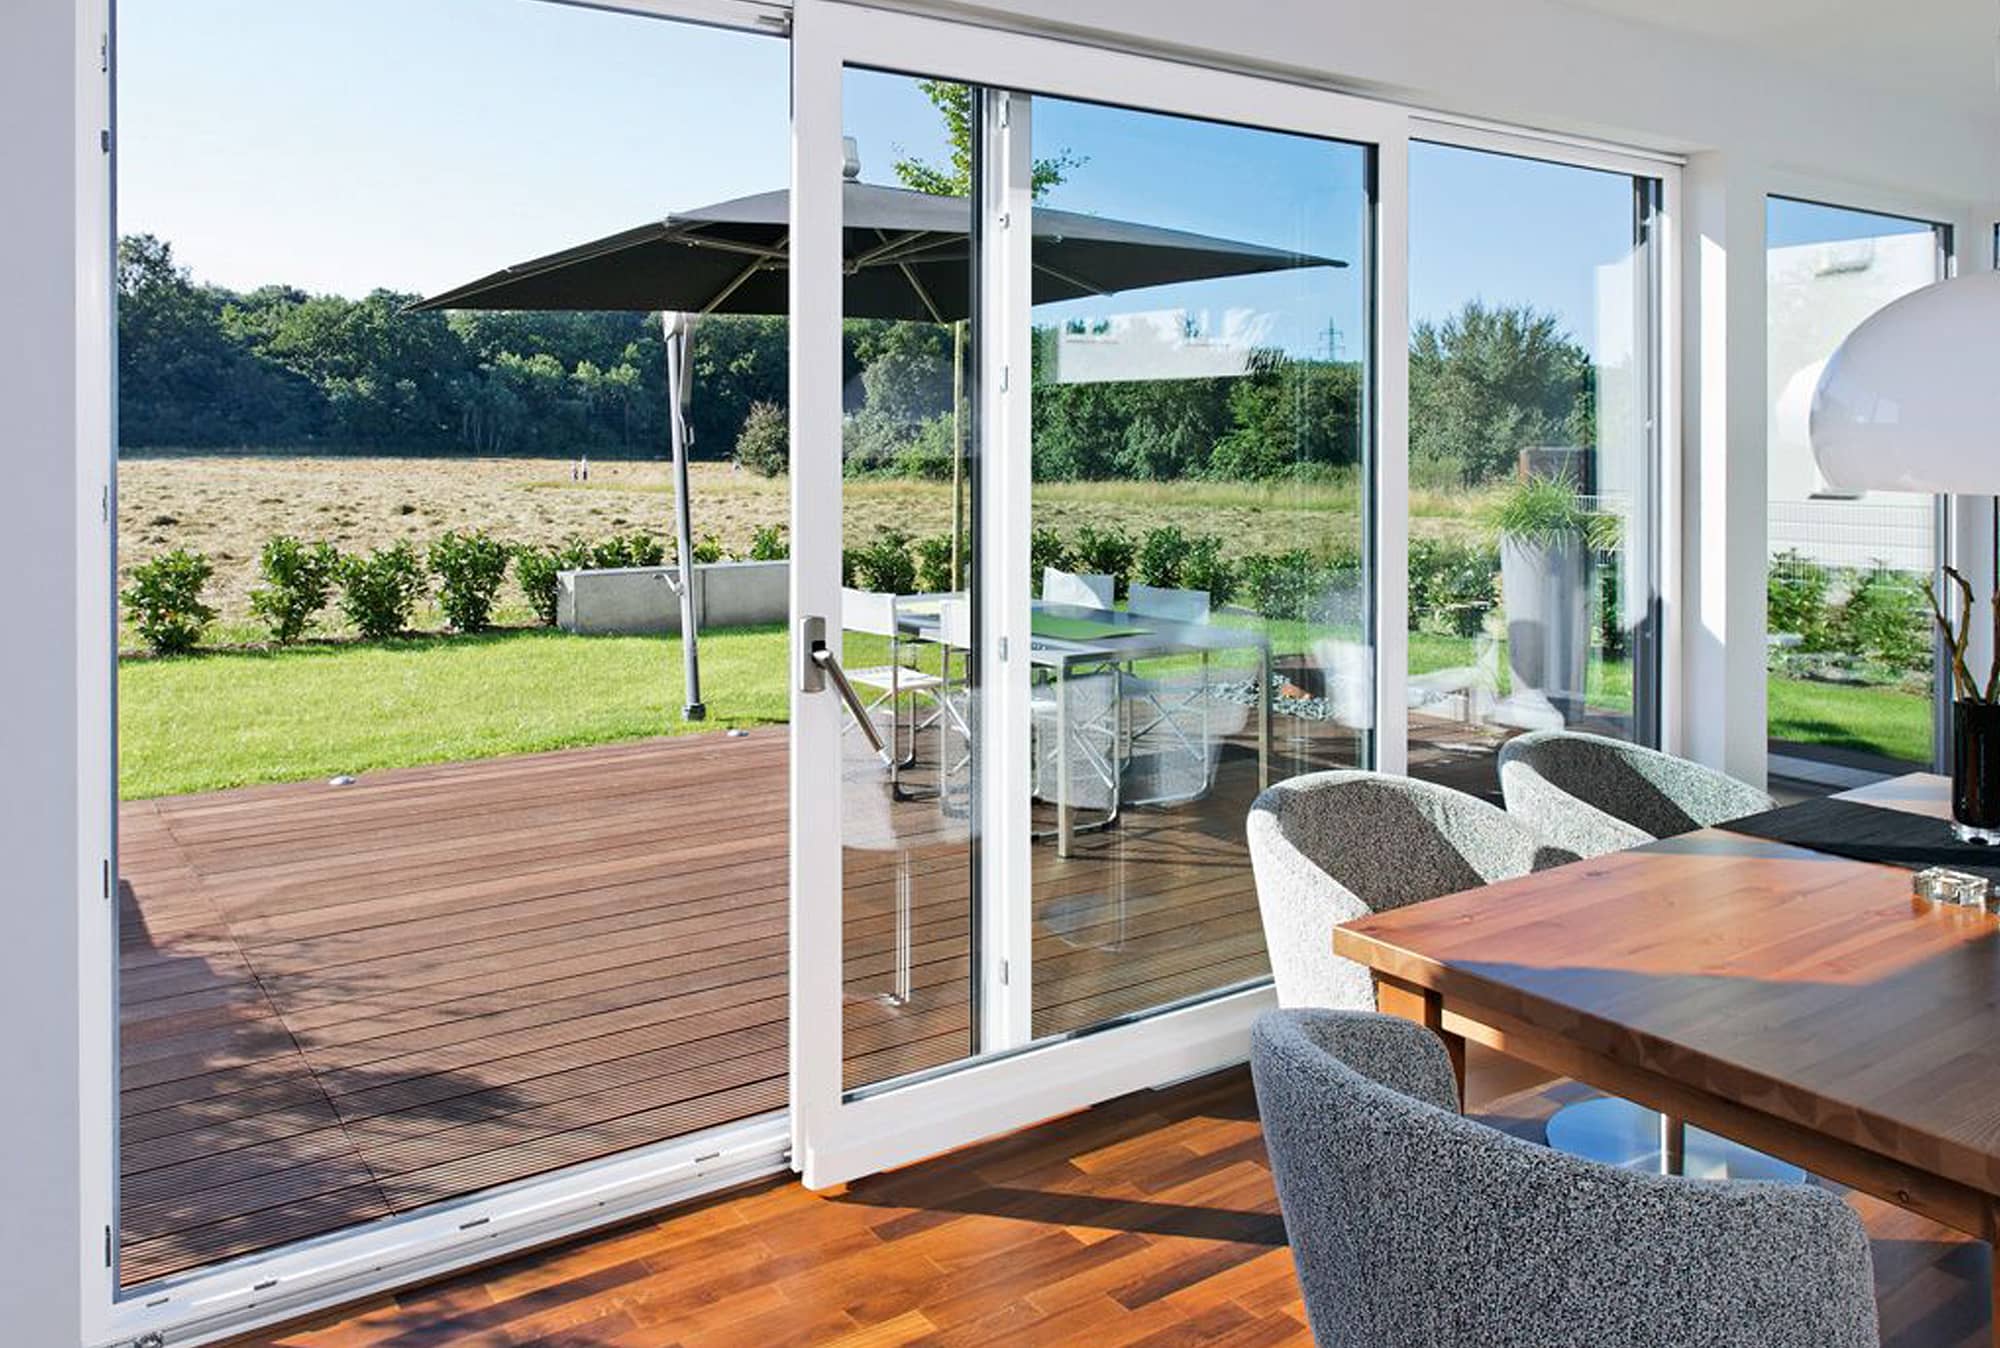 A minimal frame lift slide door system is made out of eco-friendly and energy efficient PVC